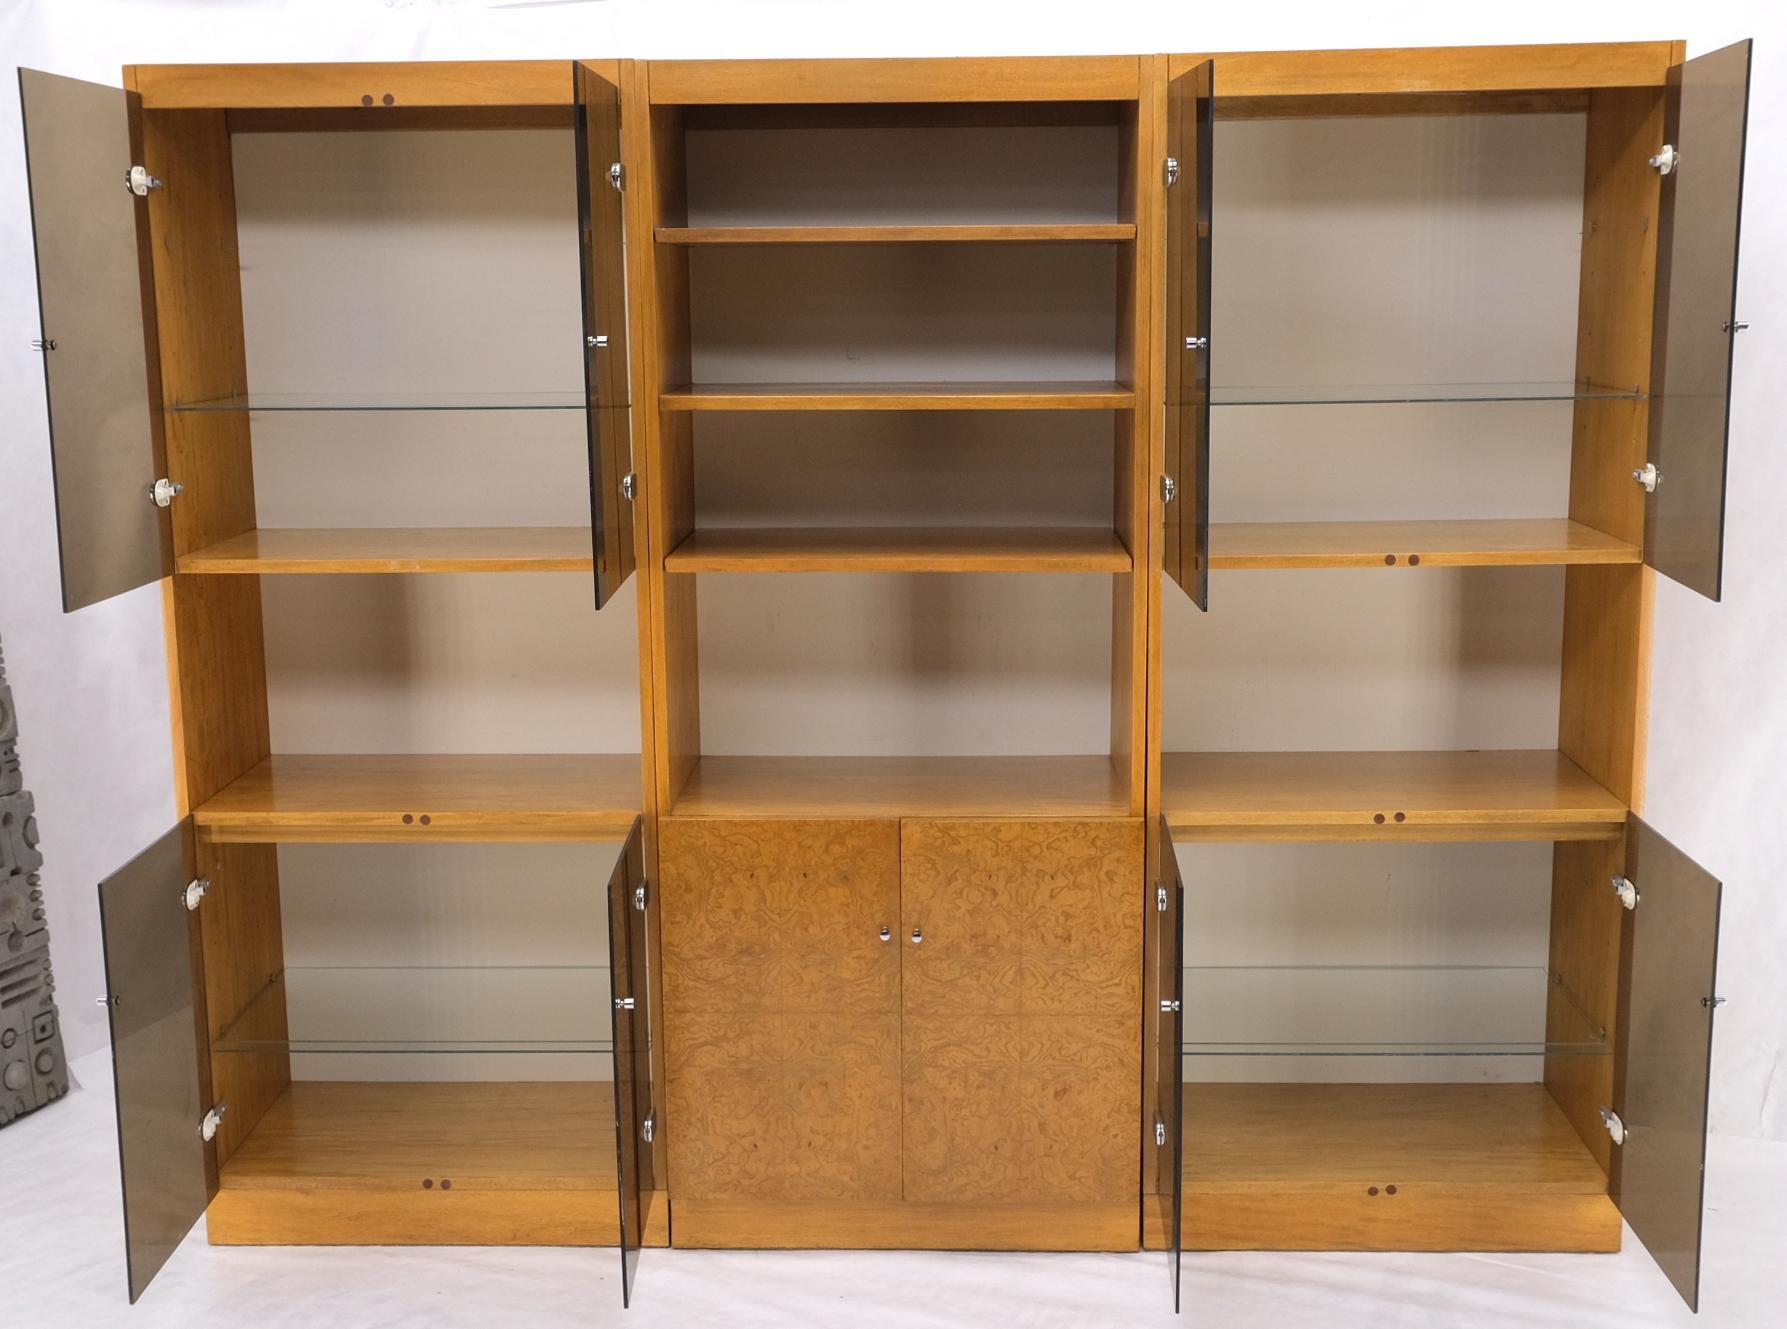 3 Bay Burl Walnut Smoked Glass Doors Cabinets Adjustable Shelves Wall Unit Mint For Sale 9